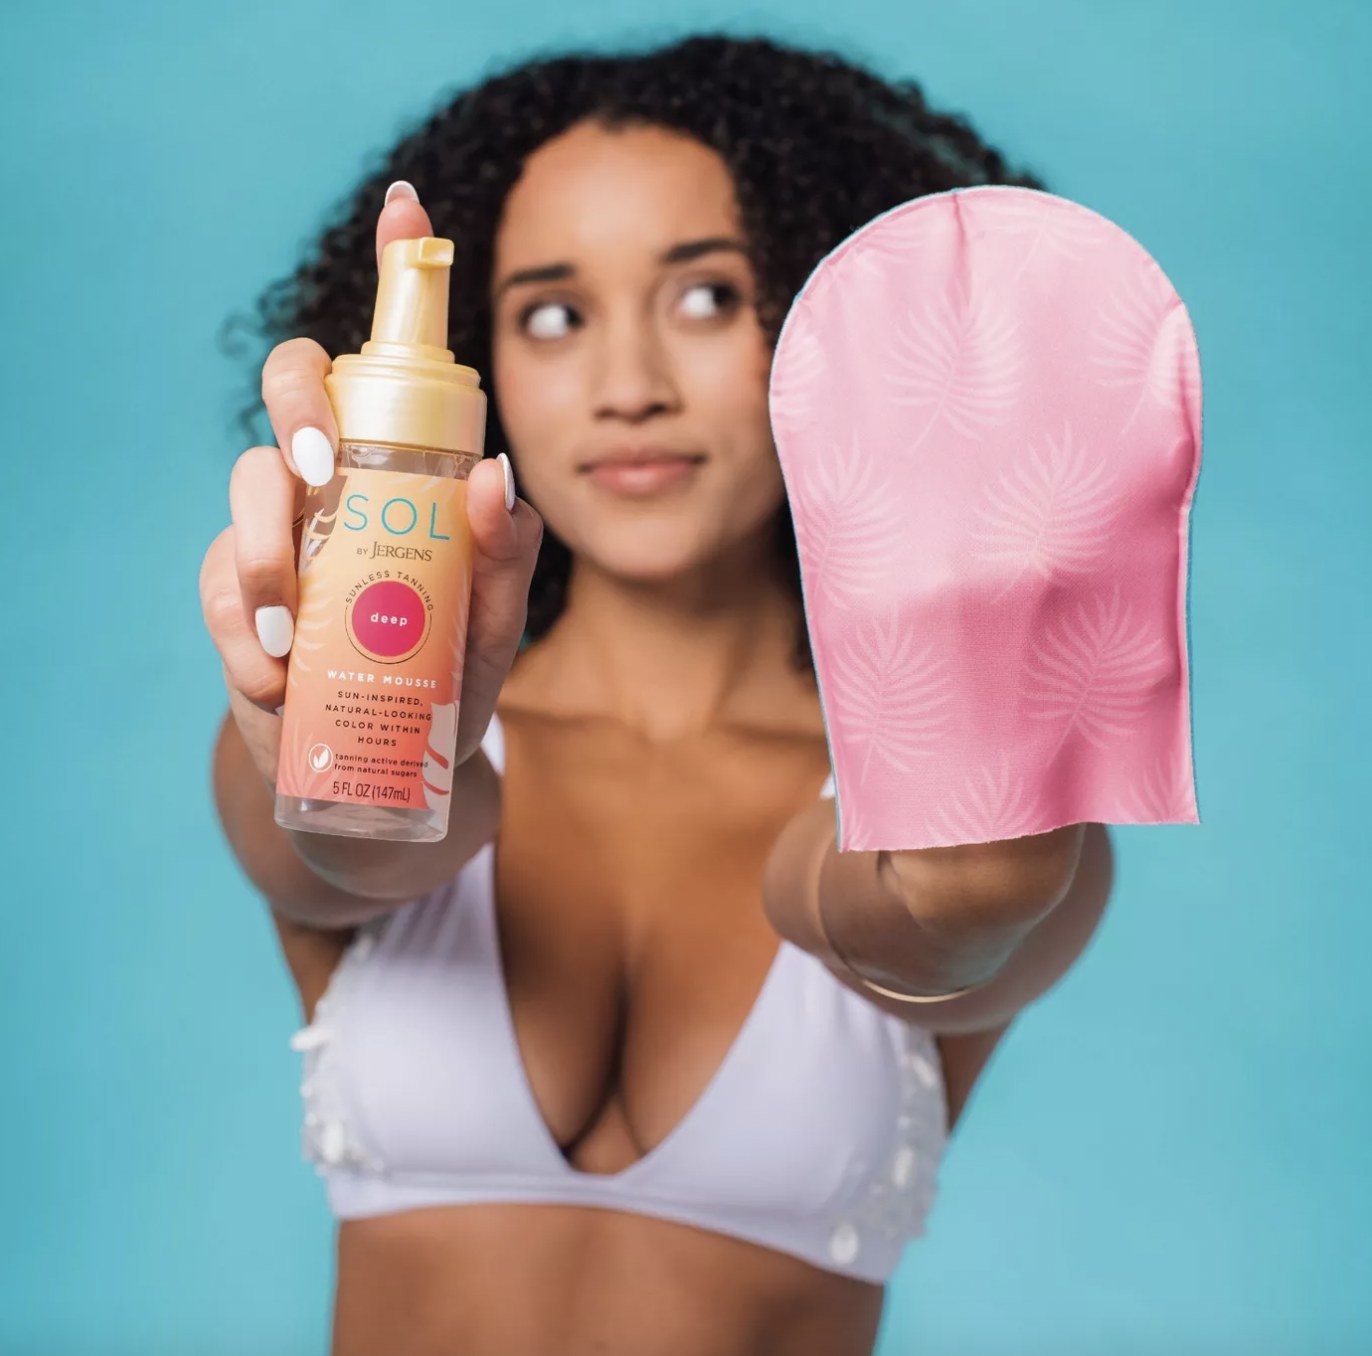 A person holding a tanning product and a mitt